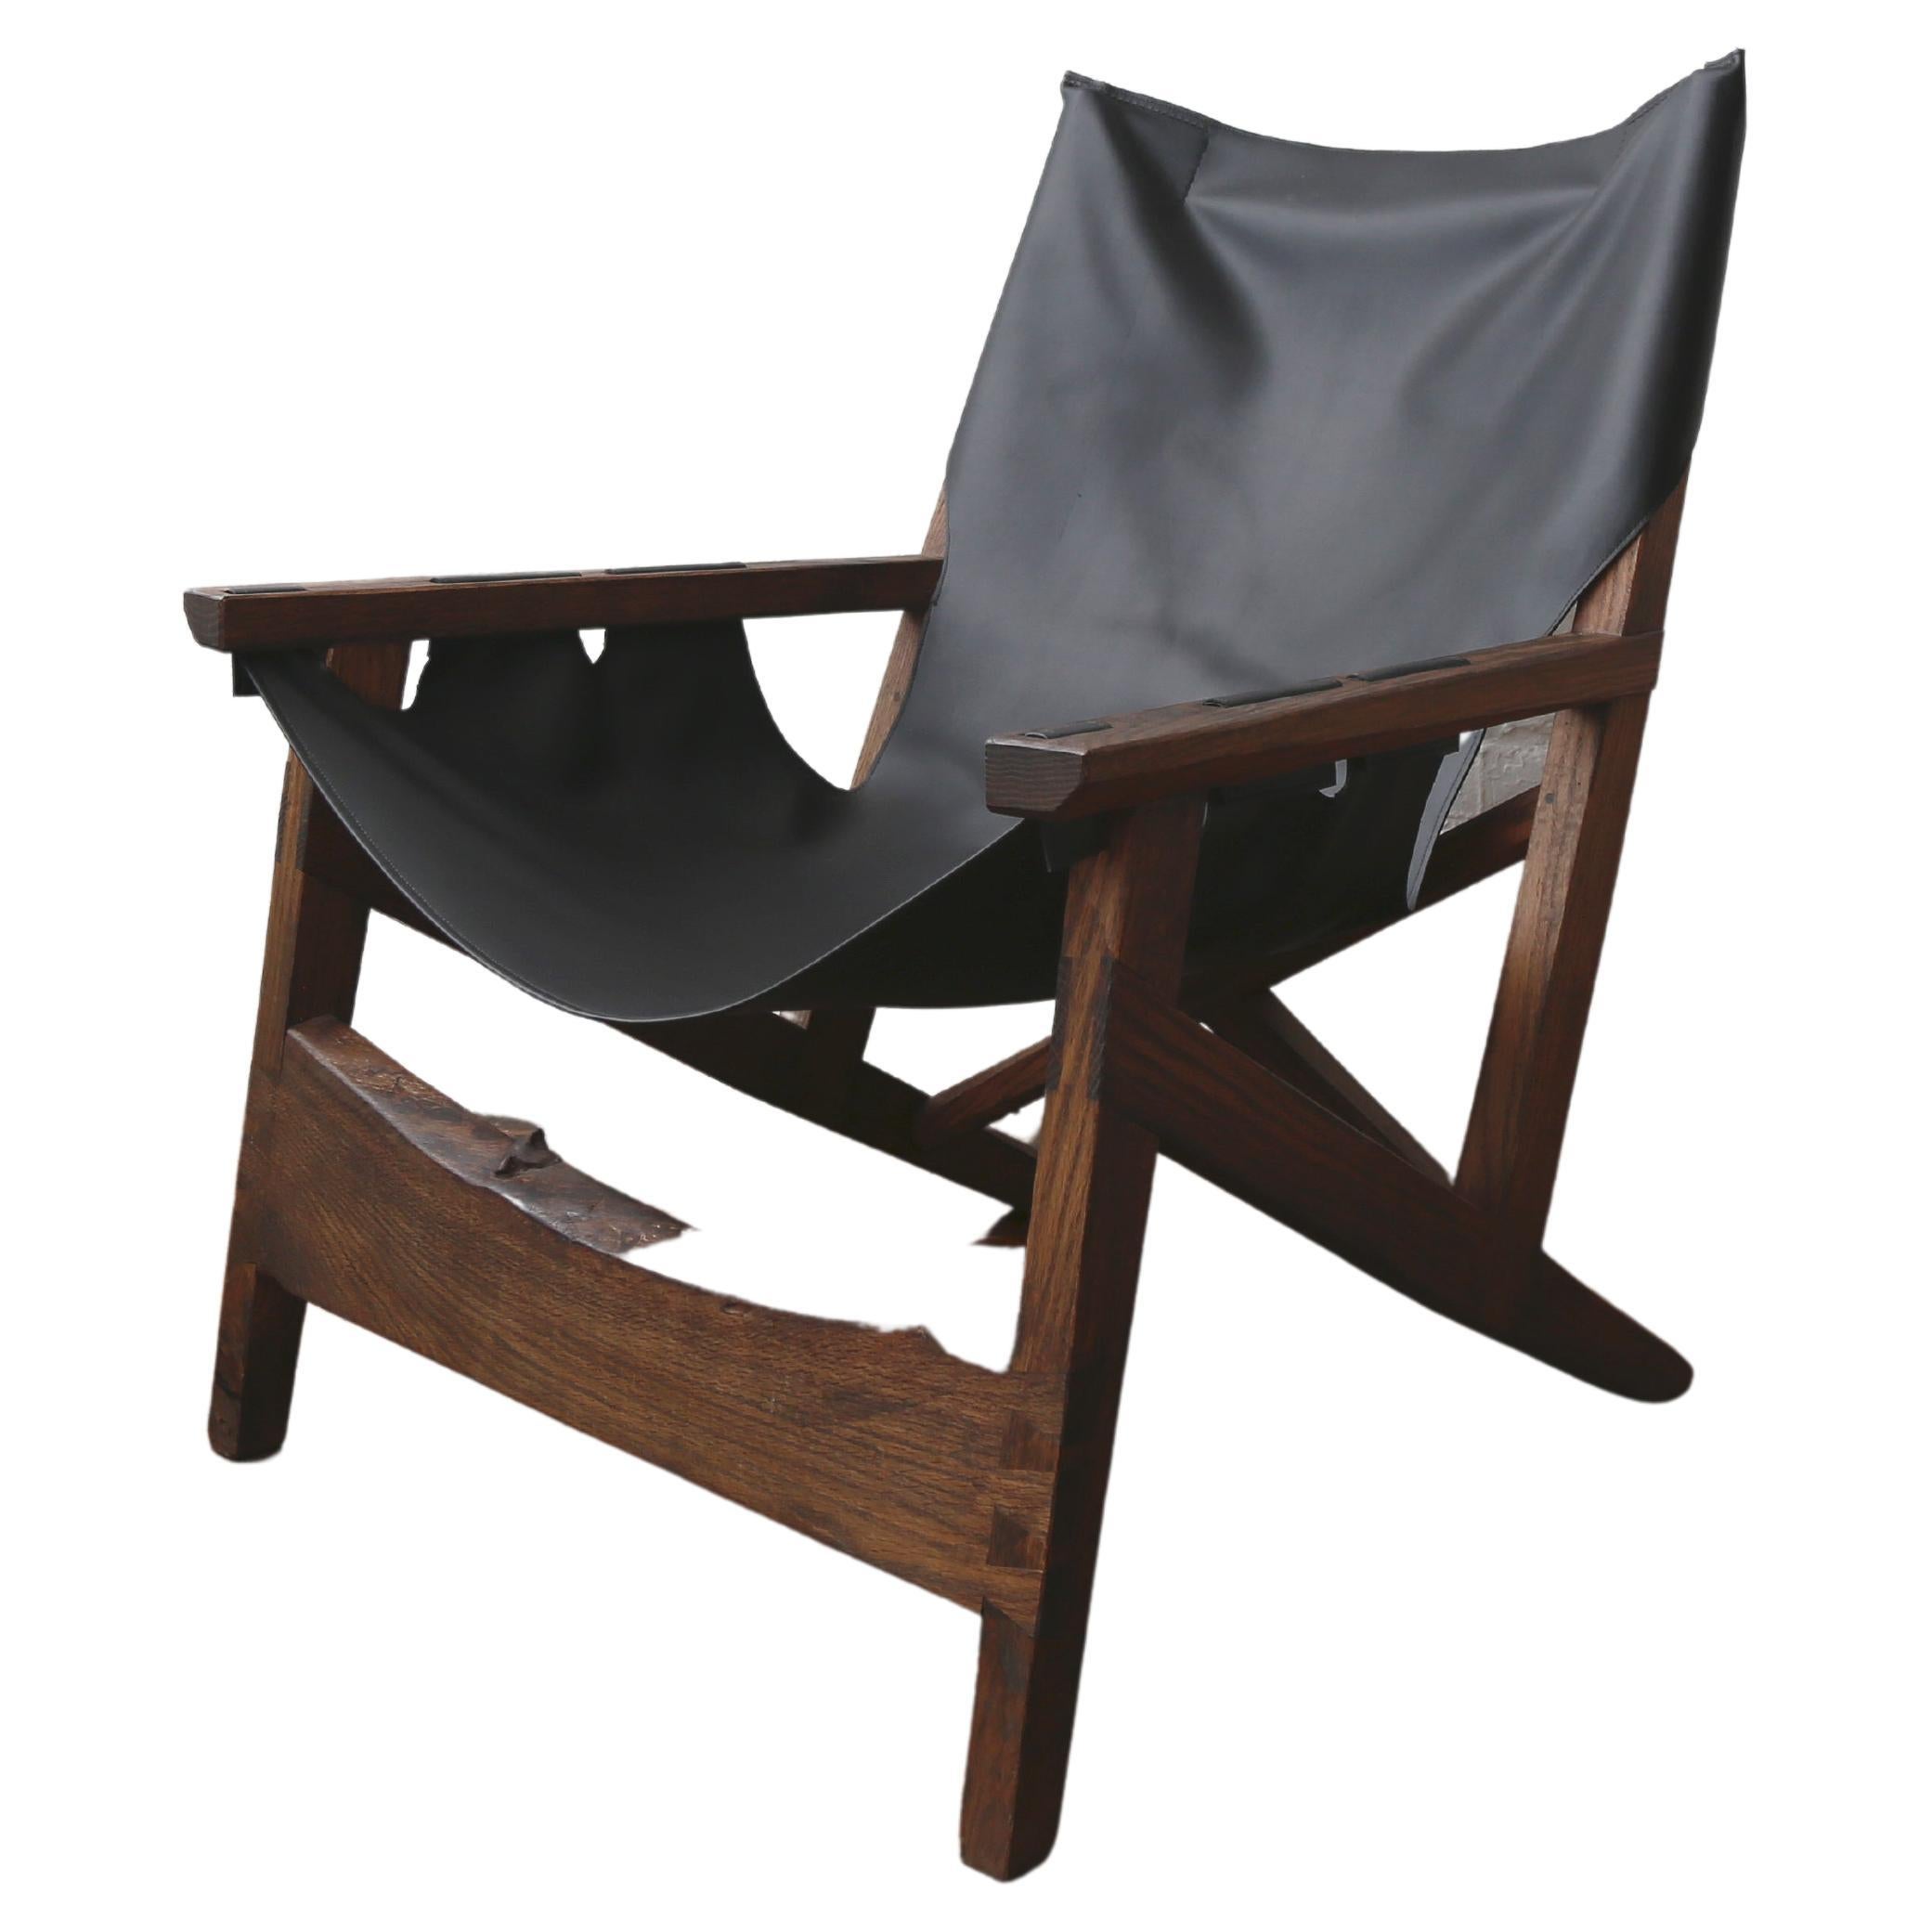 Fuugs Sling Chair Blackened Oak with Cactus Leather Sling For Sale